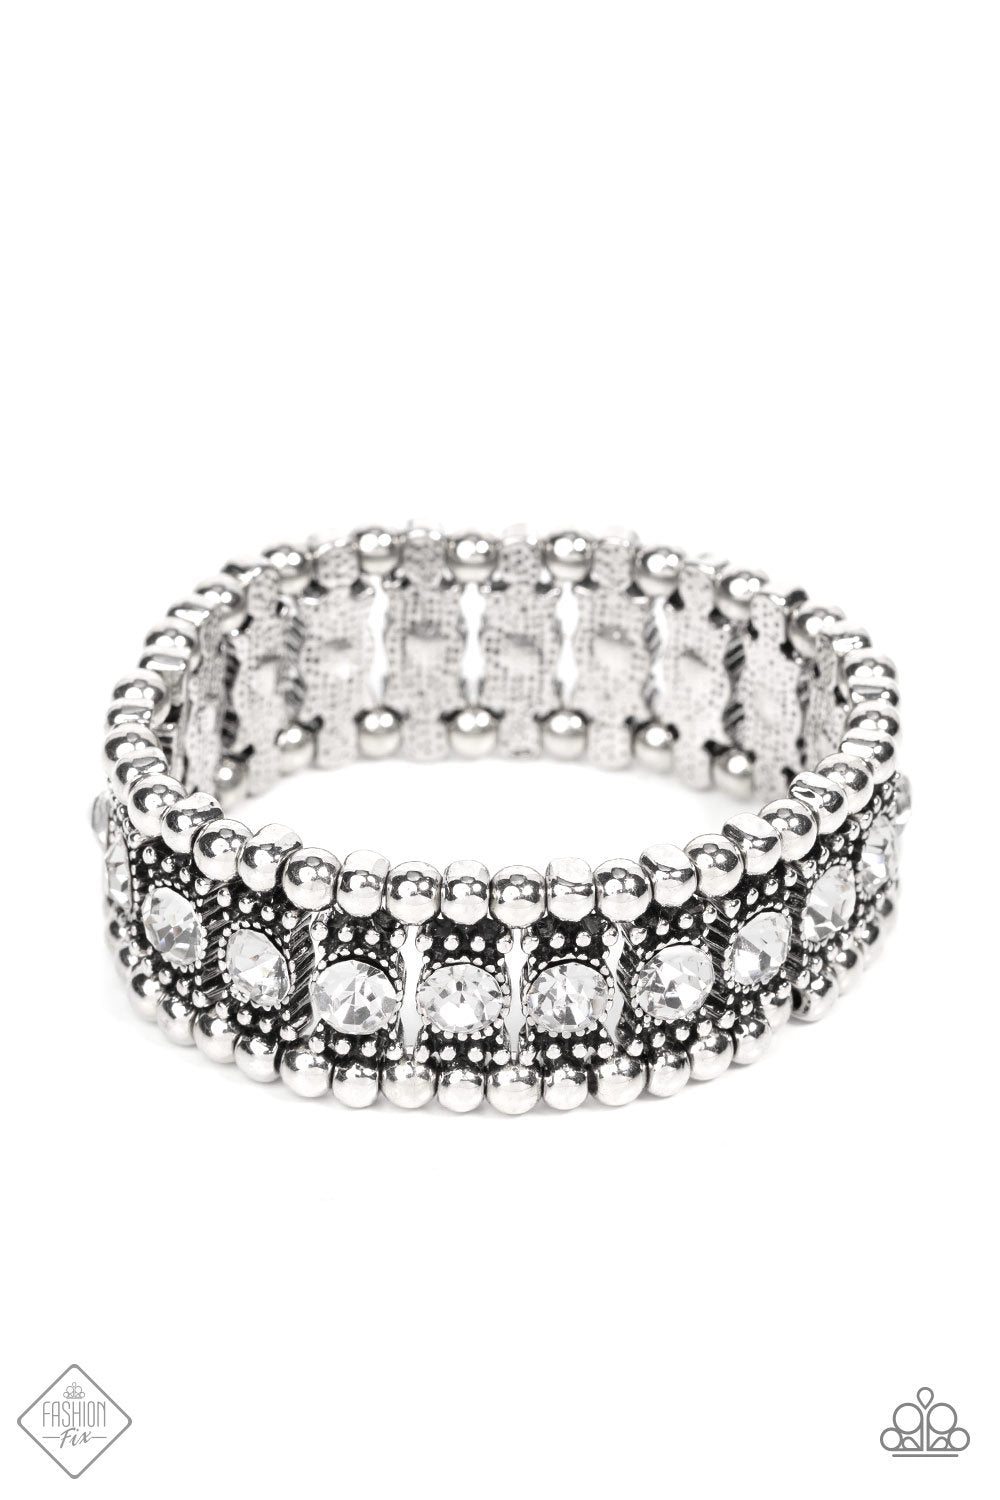 Ritzy Reboot White Rhinestone and Silver Bracelet - Paparazzi Accessories- lightbox - CarasShop.com - $5 Jewelry by Cara Jewels